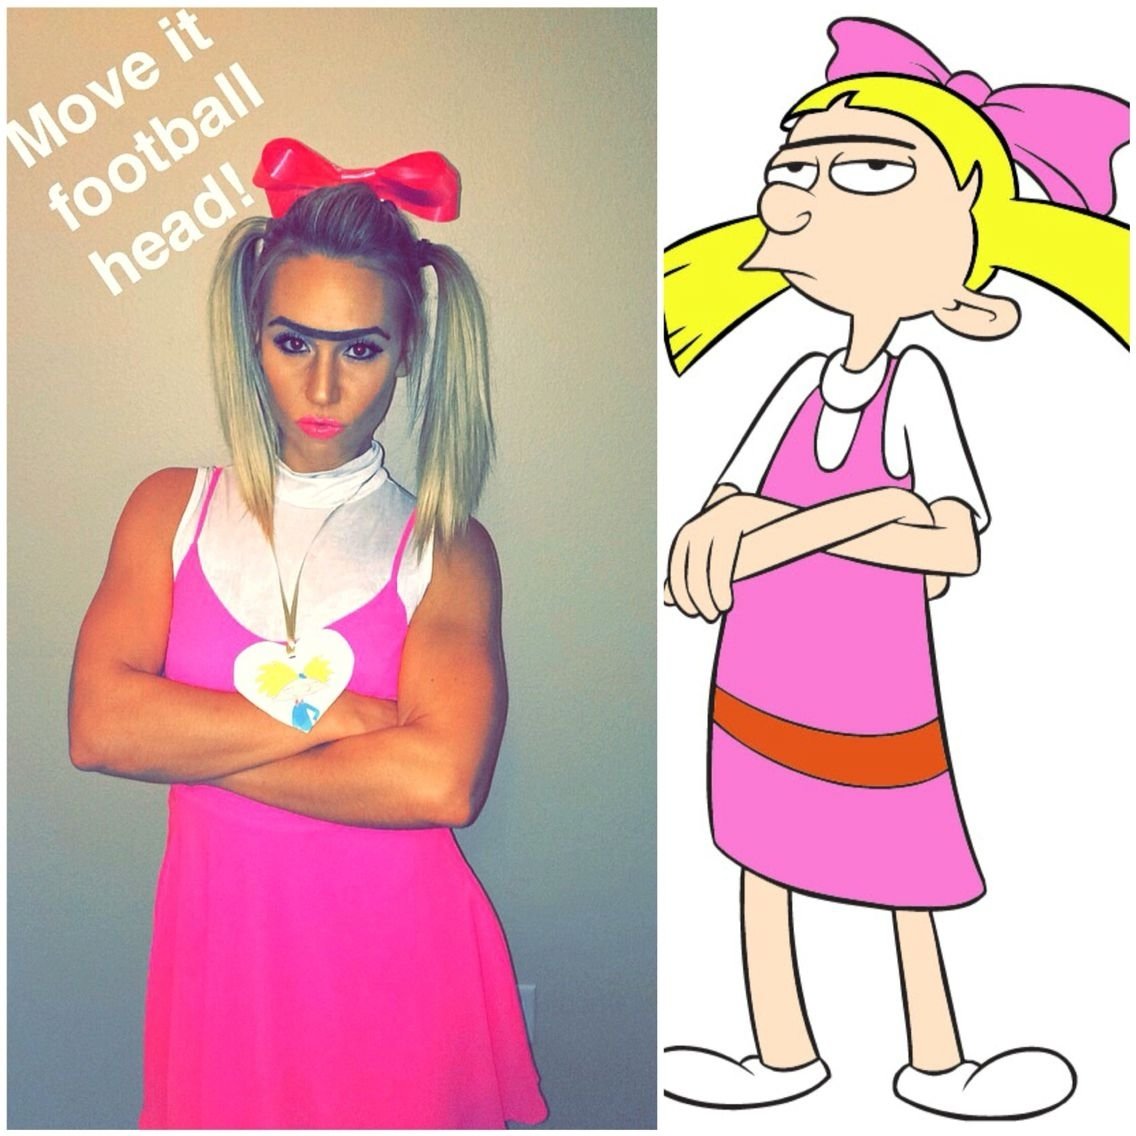 10 Great Halloween Costume Ideas For Blondes perfect blonde girl halloween costume helga pataki from hey arnold 2022